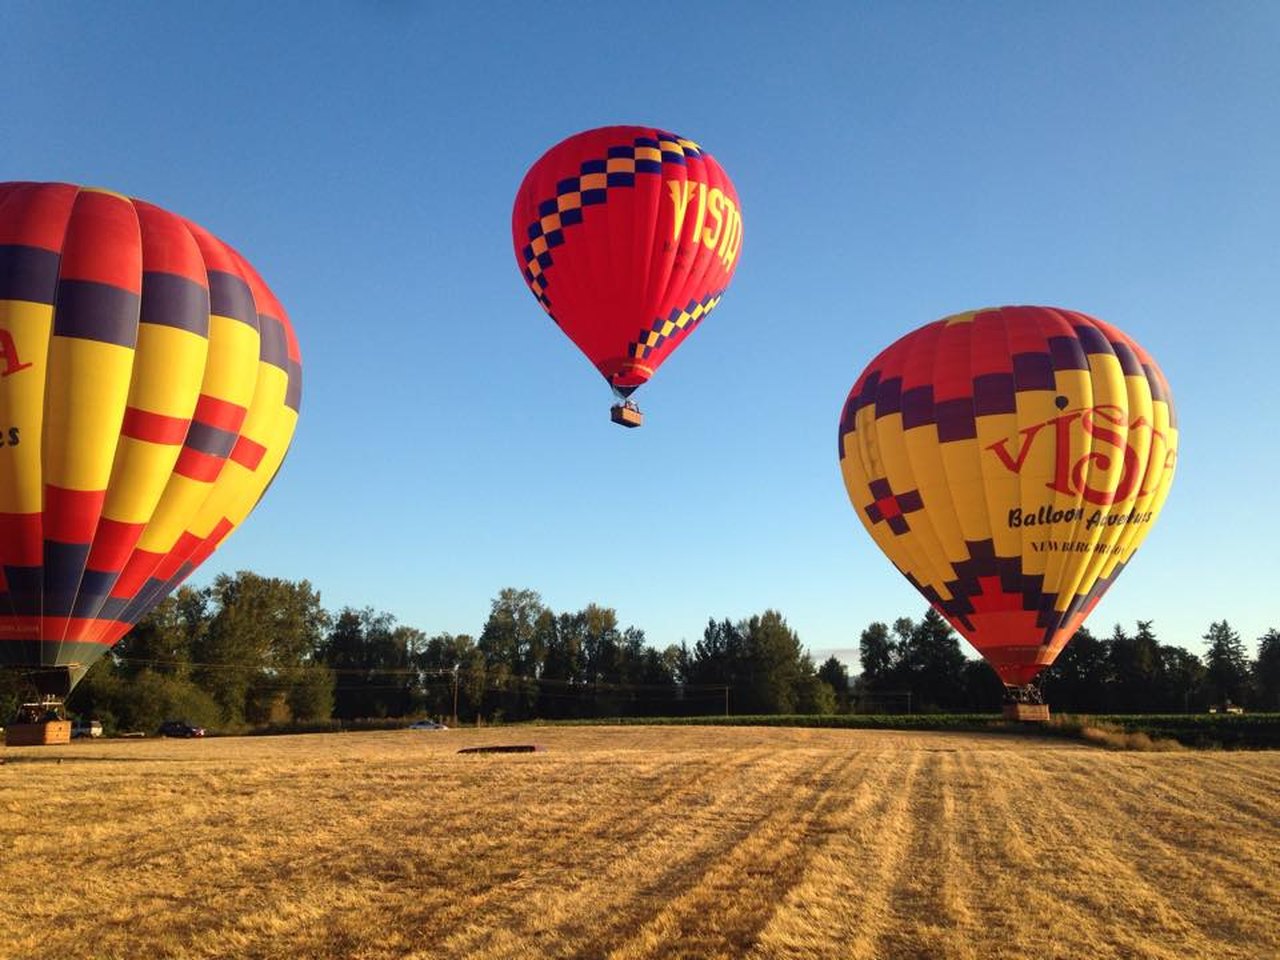 Take A Scenic Hot Air Balloon Ride Over The Forests And Inland Lakes Of Oregon